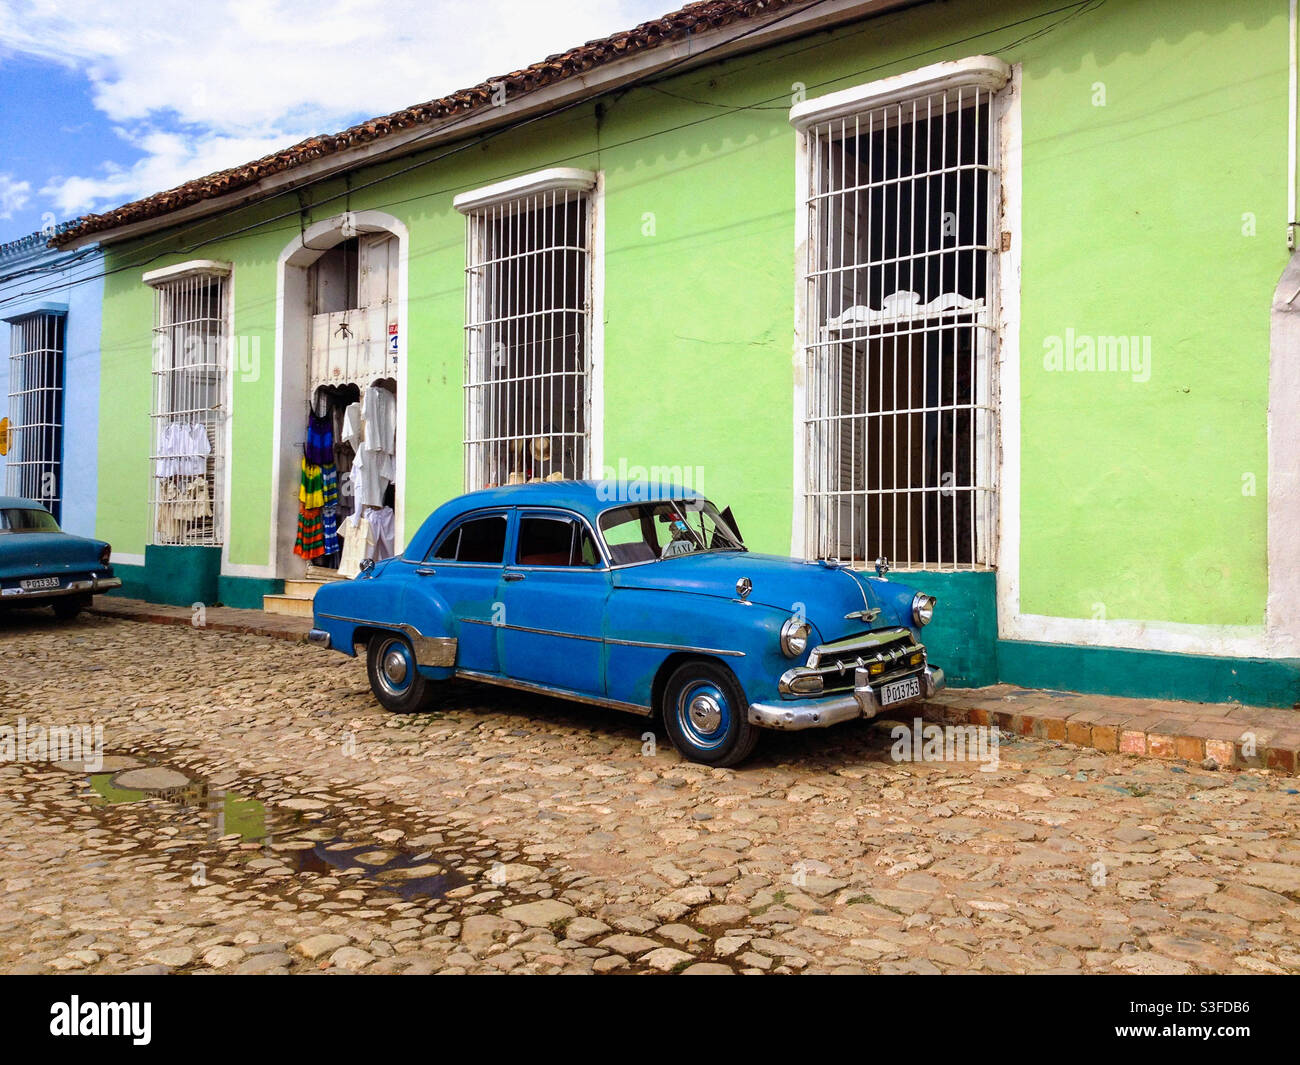 Old vintage American car parked outside a colourful old style house on cobbled street in Trinidad, Cuba Stock Photo